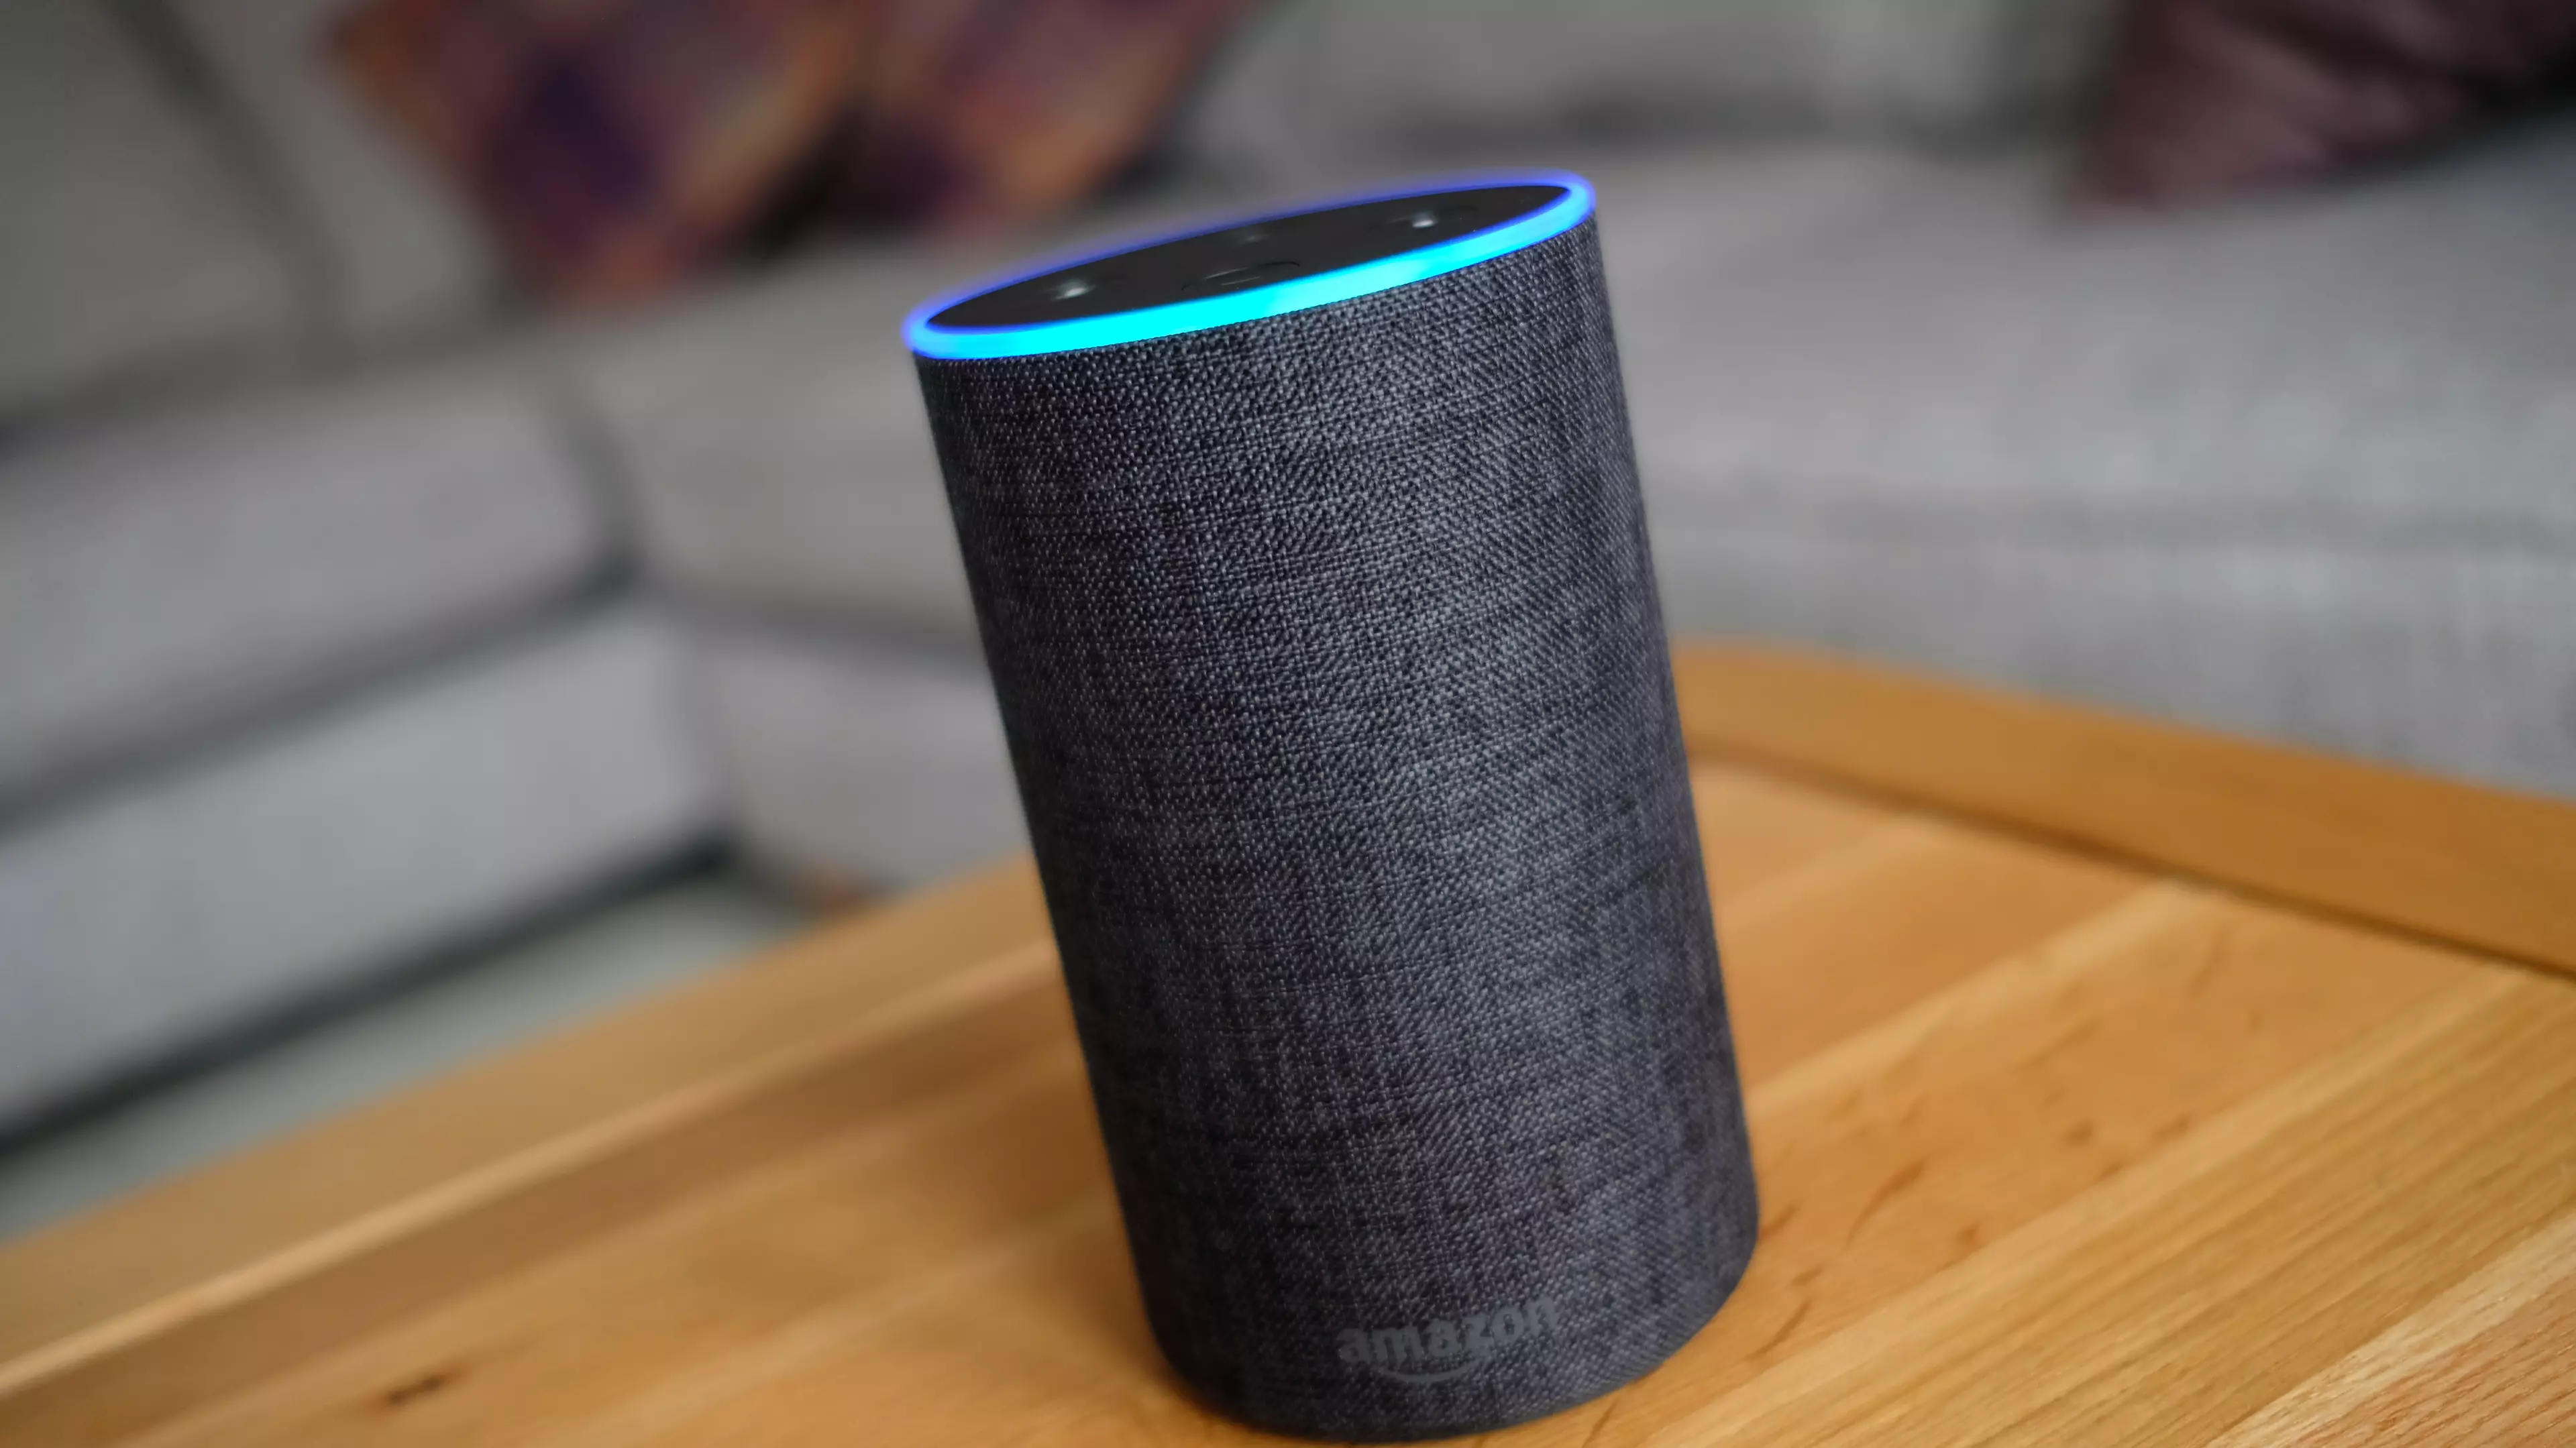 Trump Supporter Seethes After Alexa Mentions Biden When Asked Who President Is